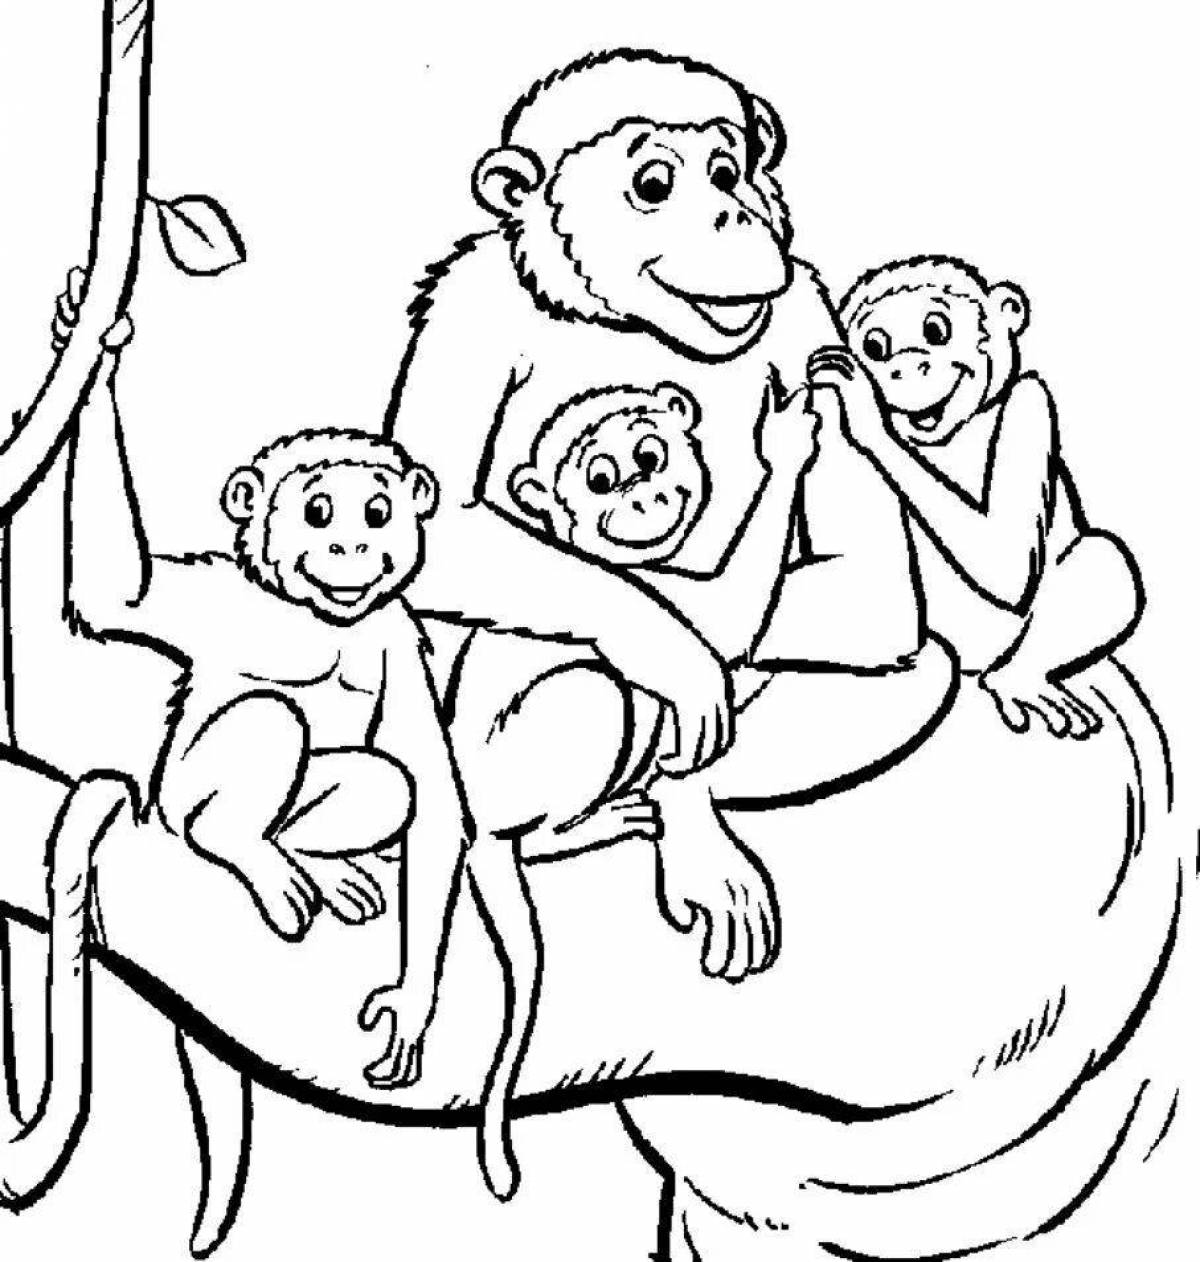 Animated monkey drawing for kids